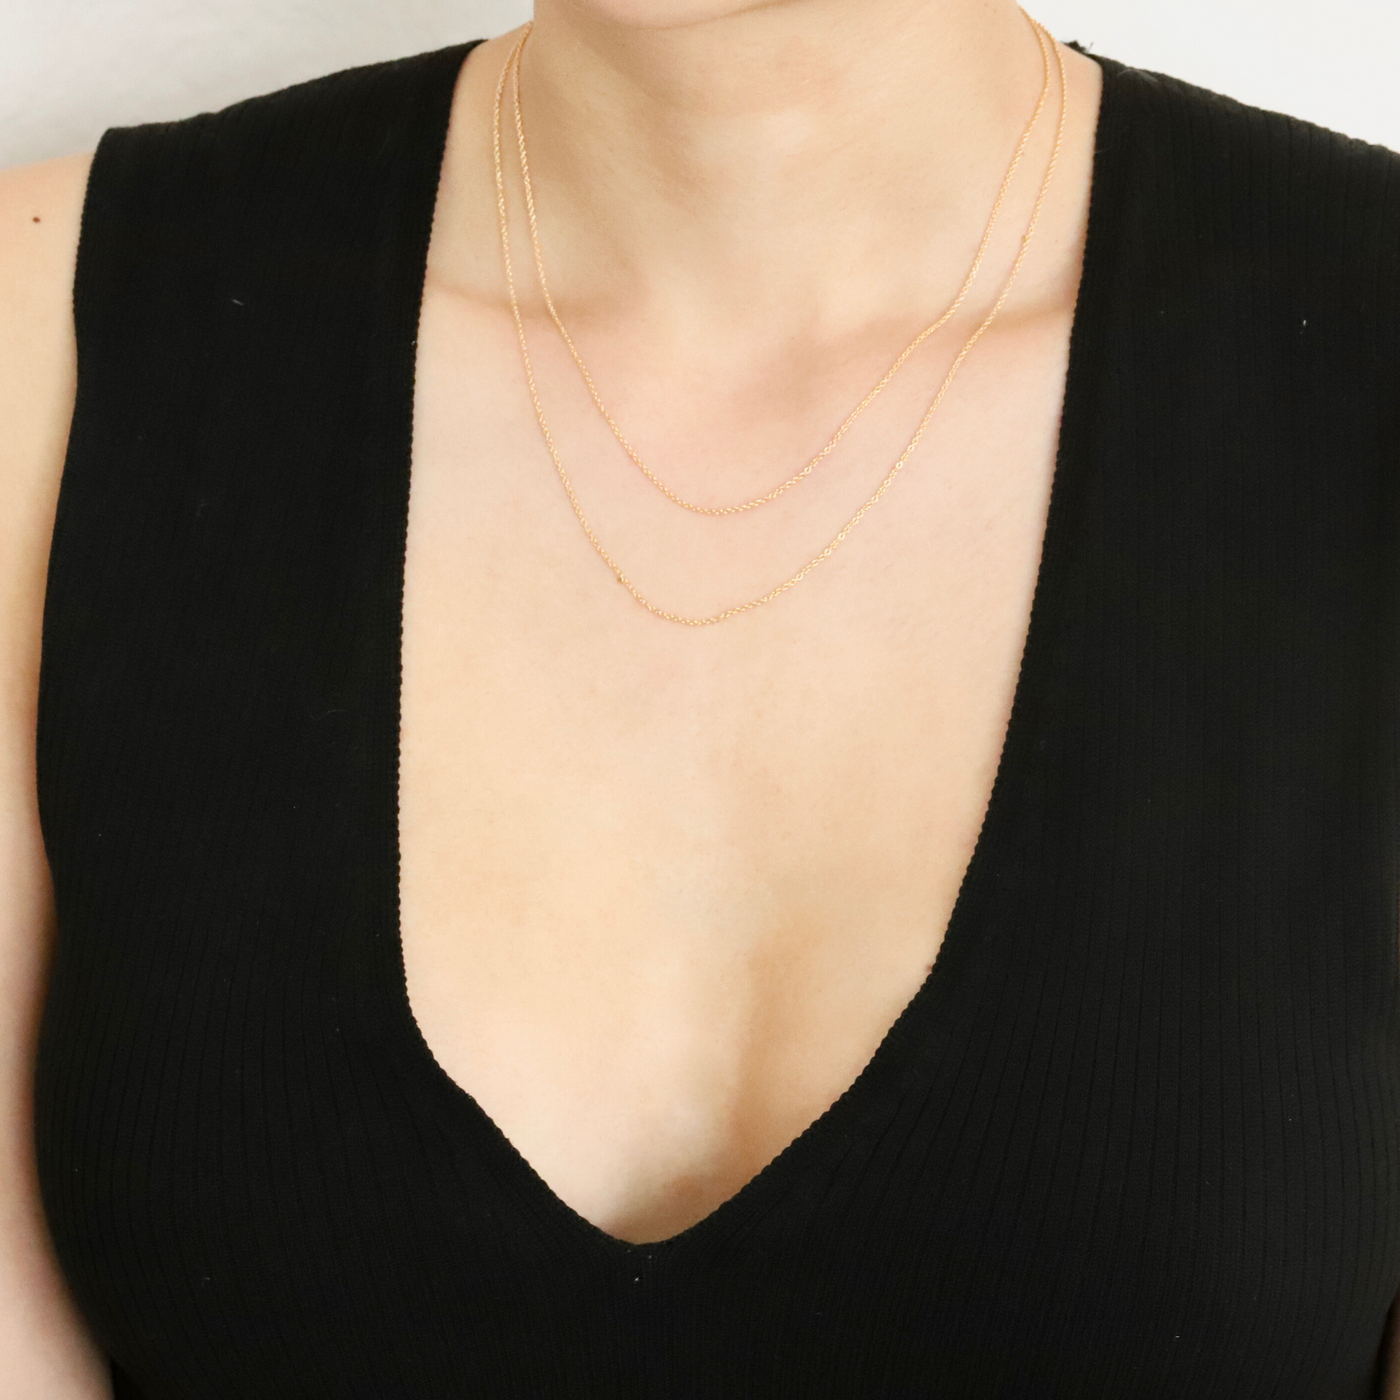 Gold filled, minimalist dainty chain necklace